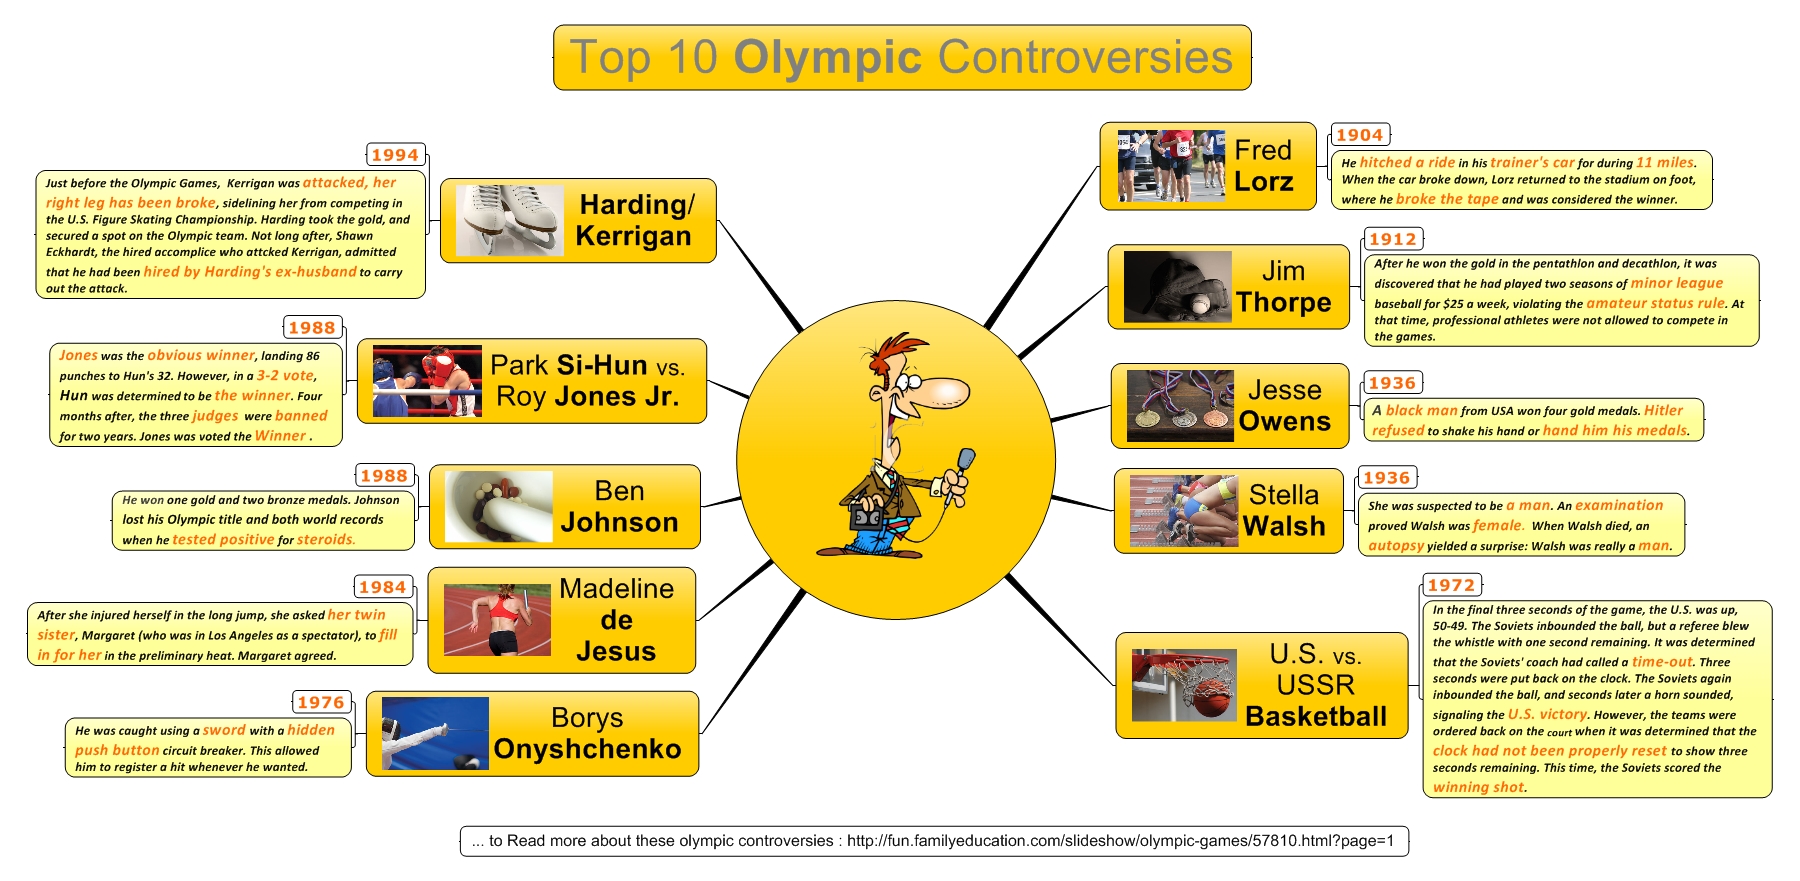 TOP 10 OLYMPIC CONTROVERSIES